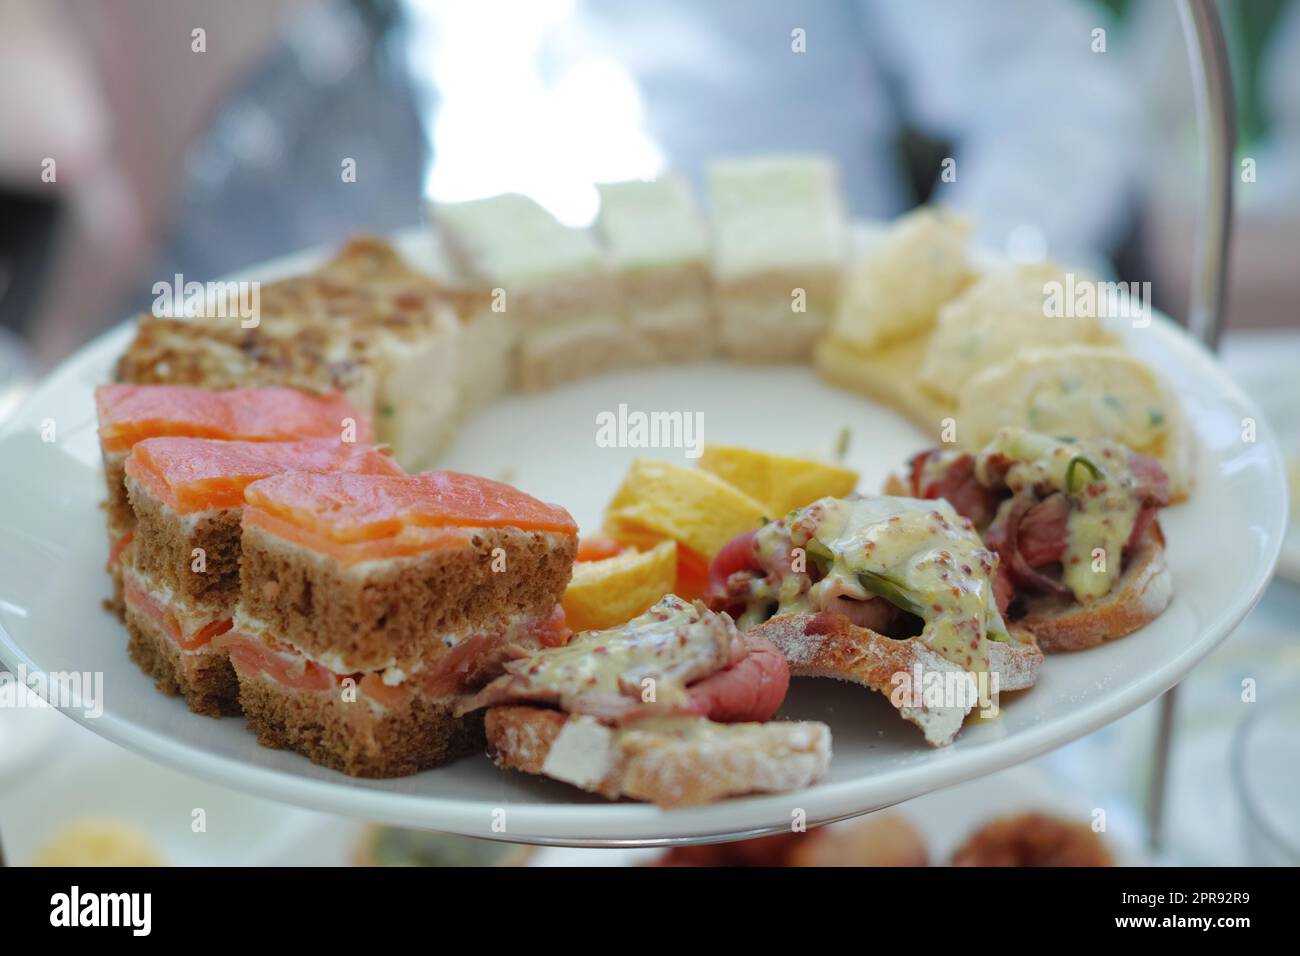 Tasty food platter at a luxury dinner event on a table. Delicious plate of food served for lunch or dinner at home. Healthy gourmet meal made at a restaurant. Starters or snacks presented at a party Stock Photo